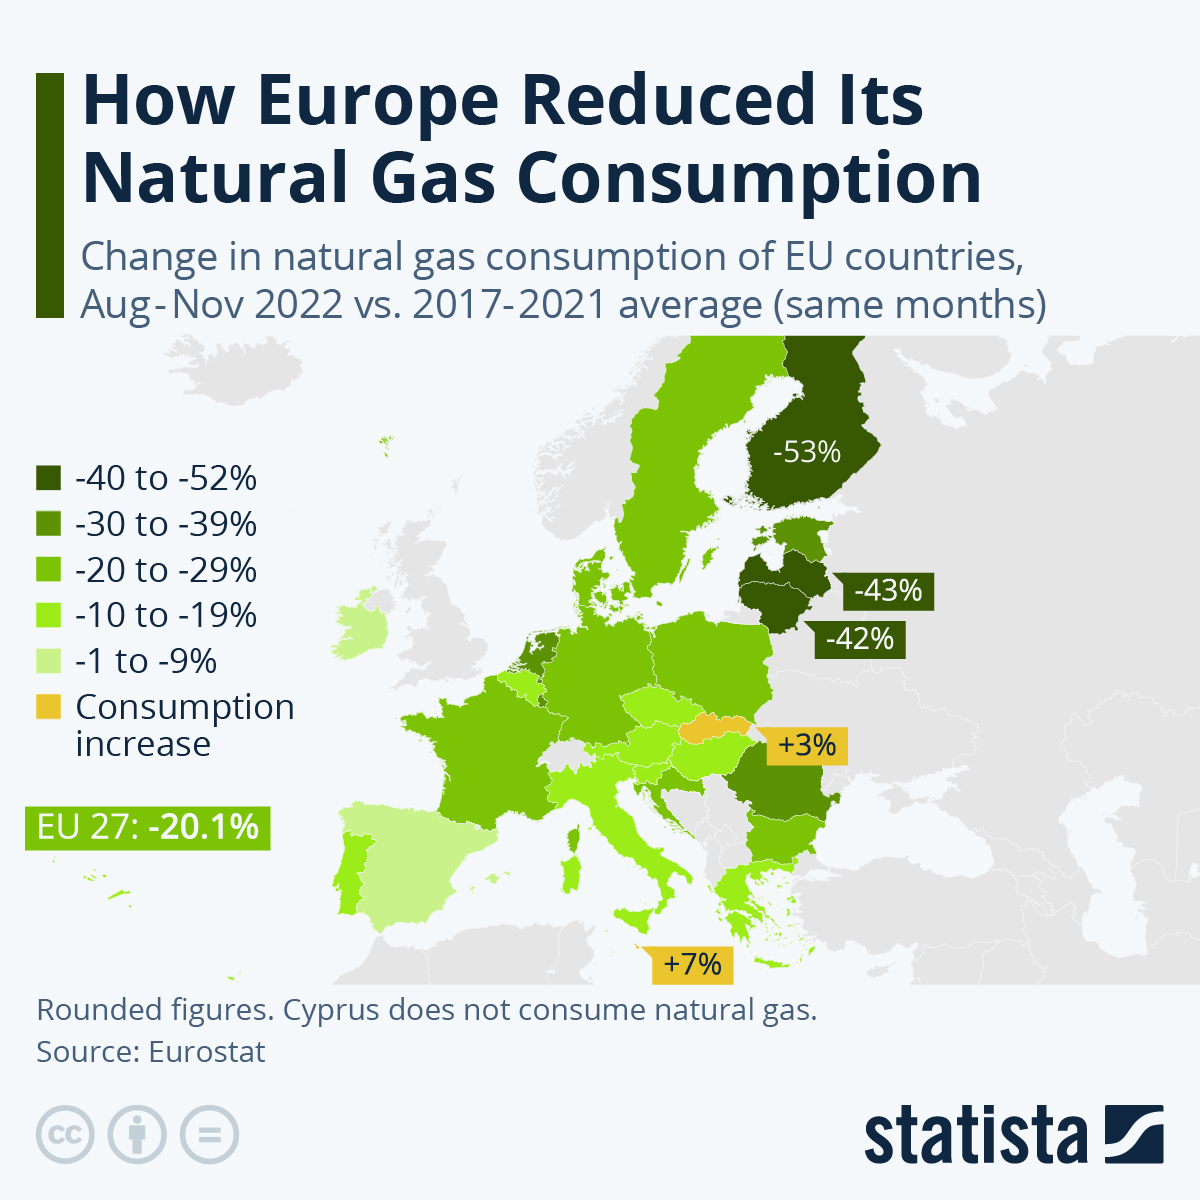 How has Europe Reduced Its Natural Gas Consumption?